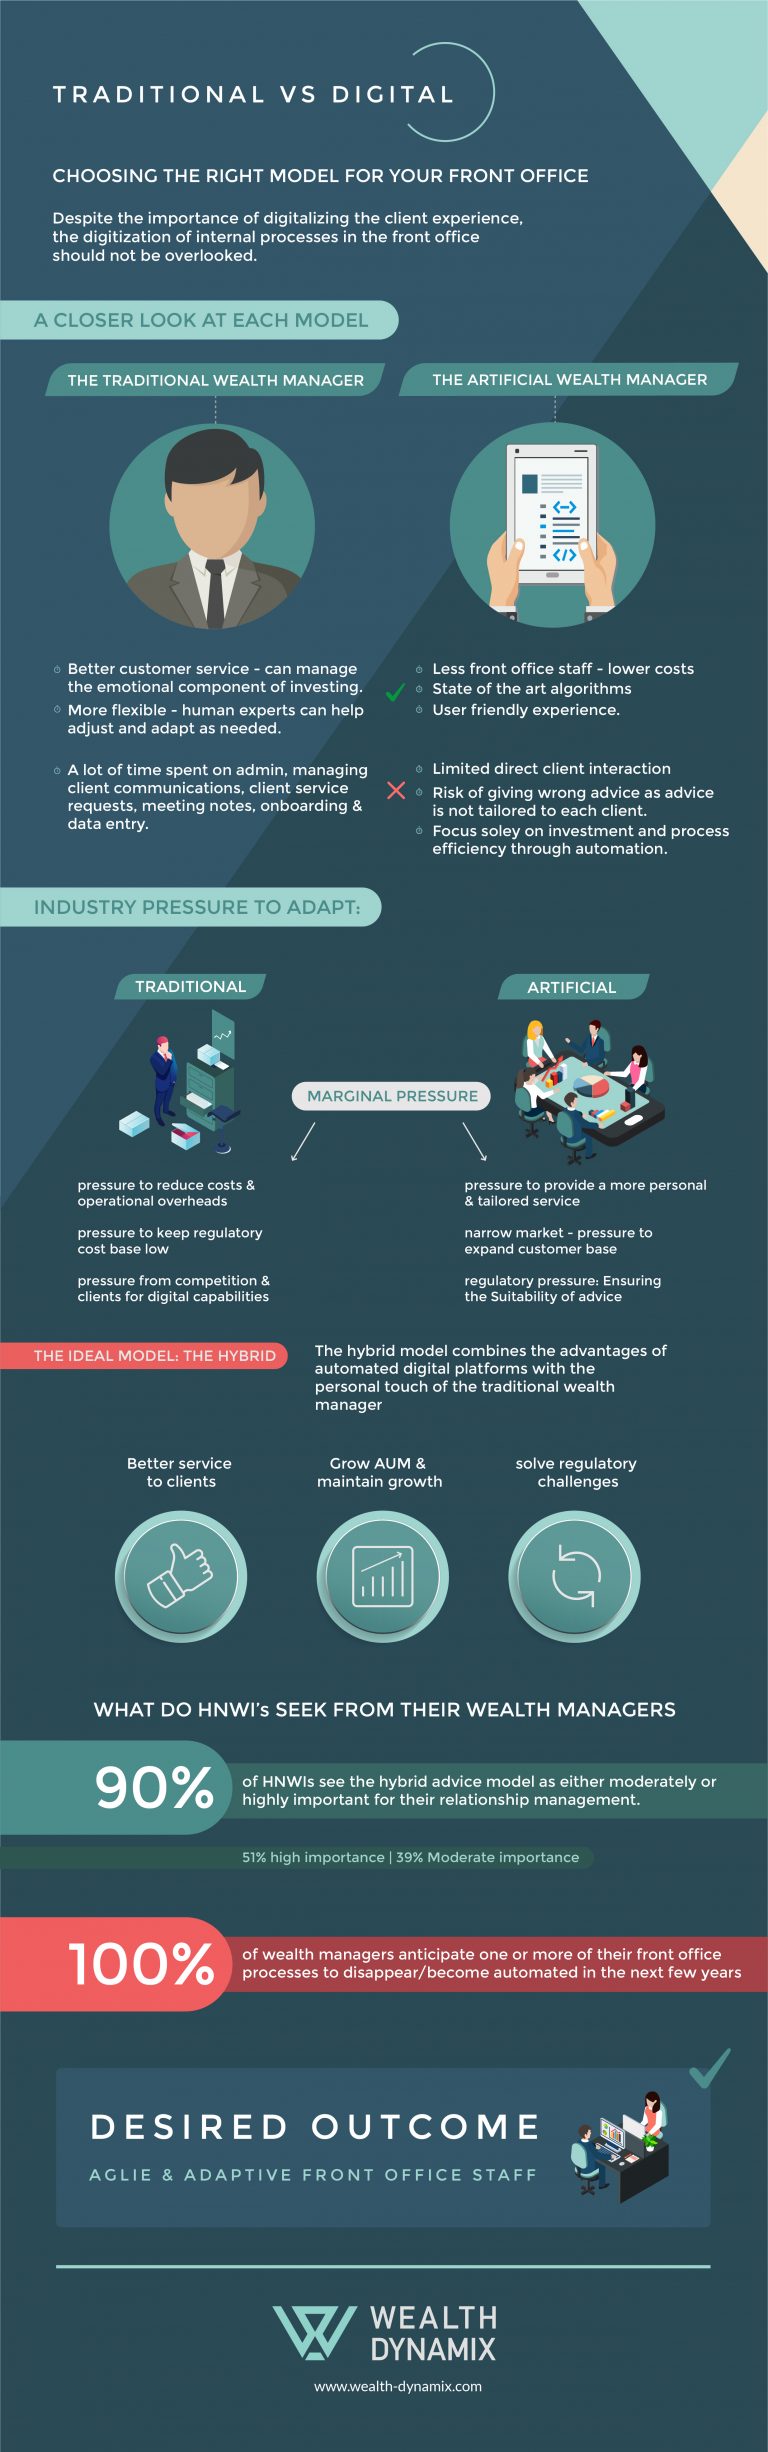 Infographic by Wealth Dynamix showing the differences between traditional and digital wealth management systems